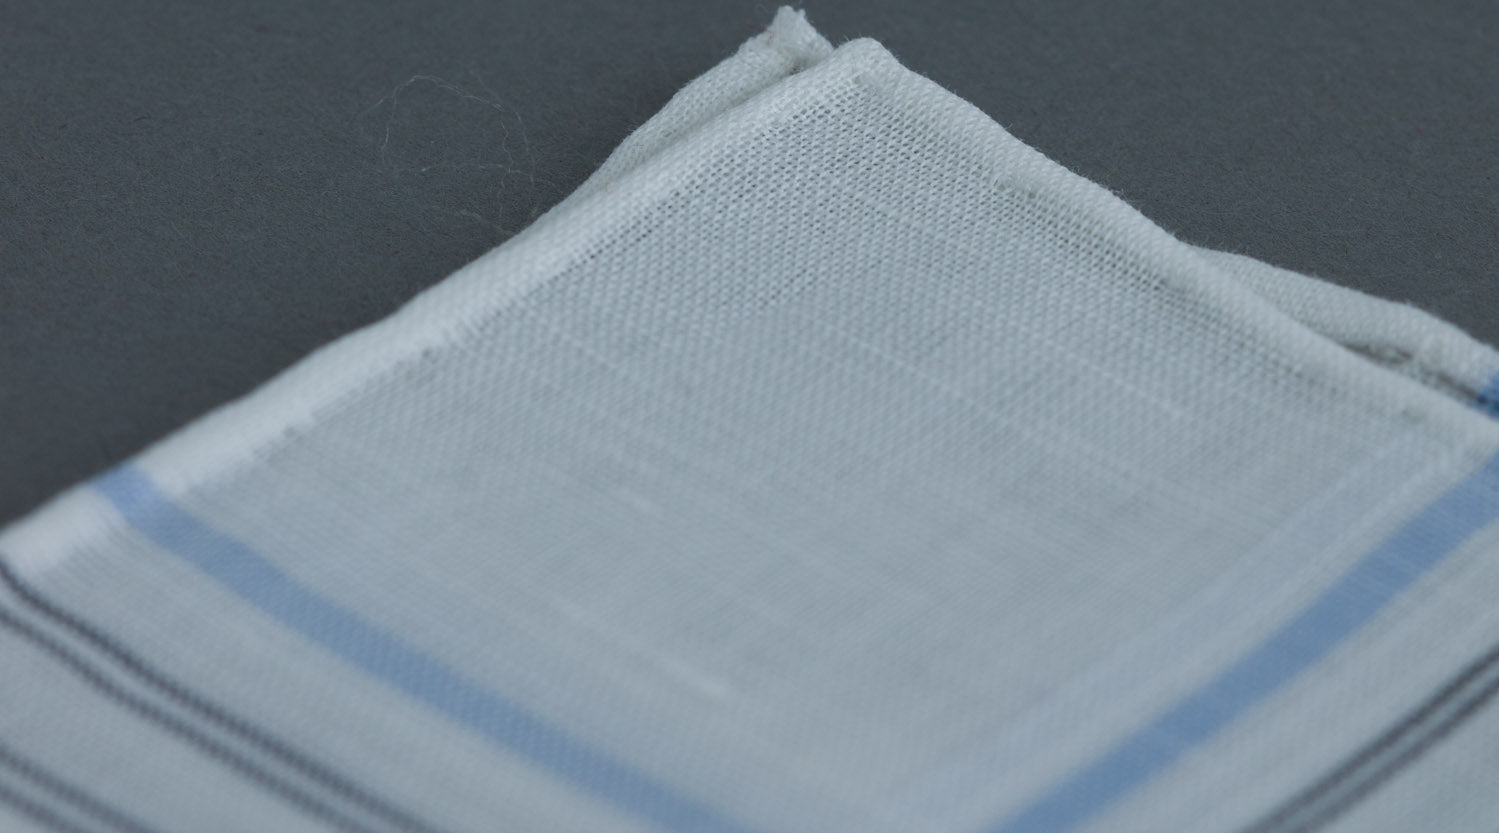 A close up of a Simonnot Godard Aran Pocket Square with hand-rolled edges.